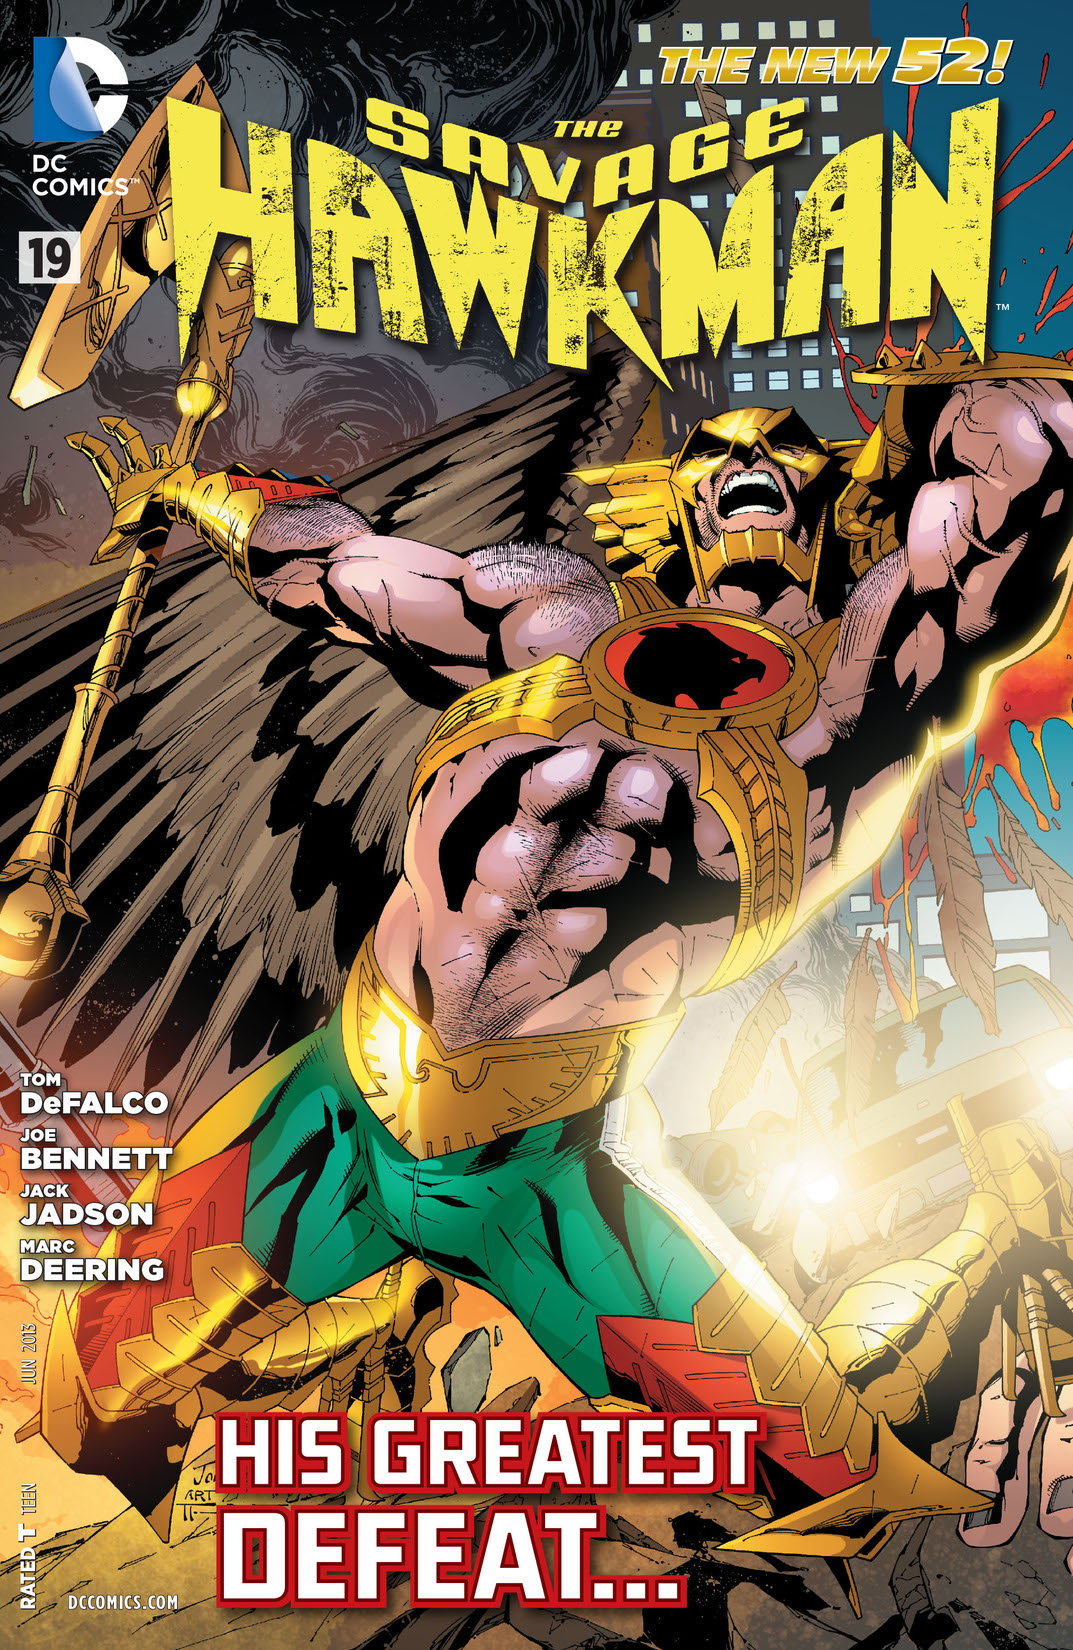 The Savage Hawkman #19 preview images